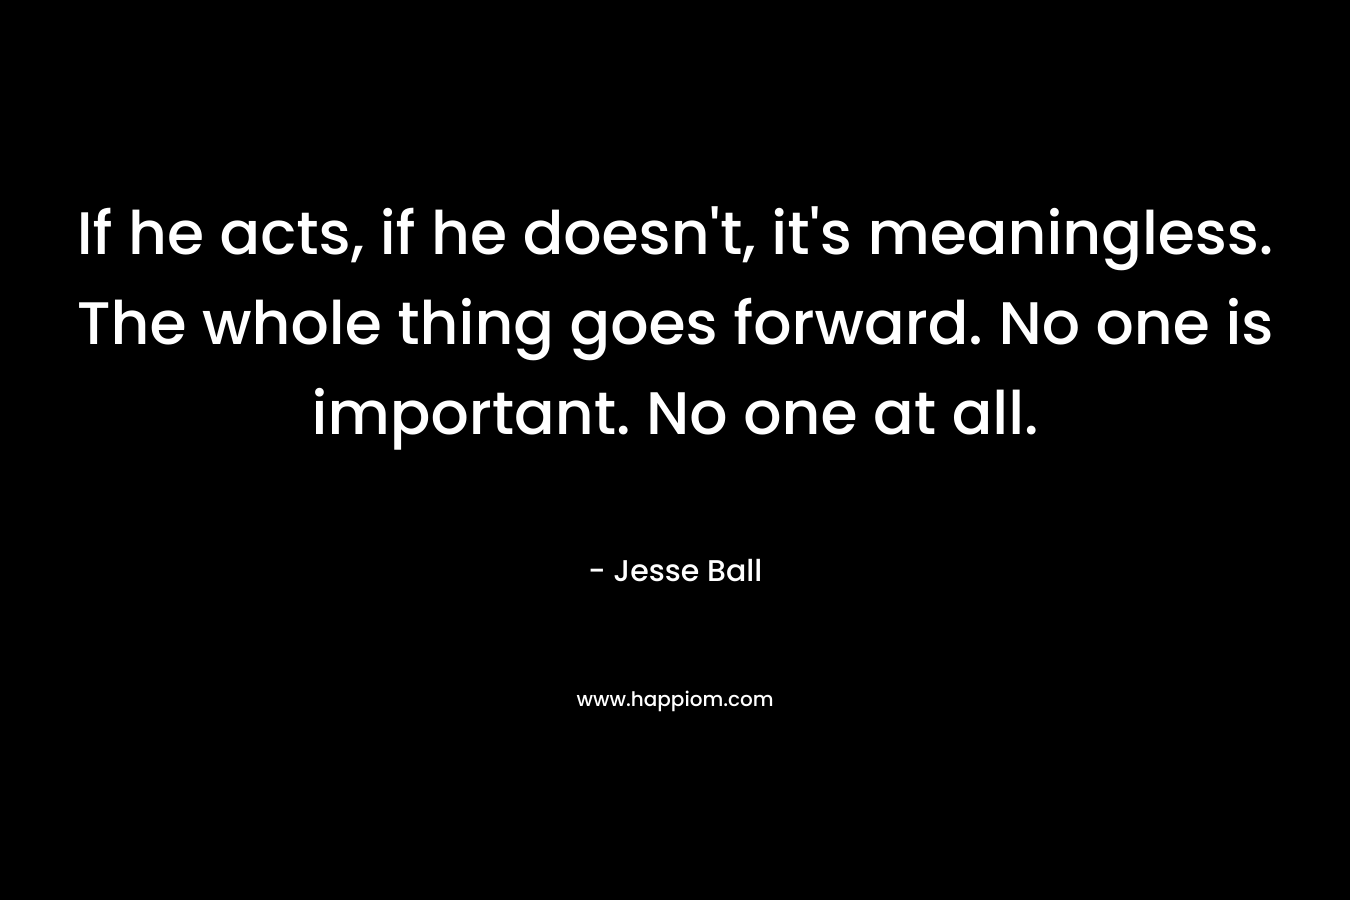 If he acts, if he doesn't, it's meaningless. The whole thing goes forward. No one is important. No one at all.